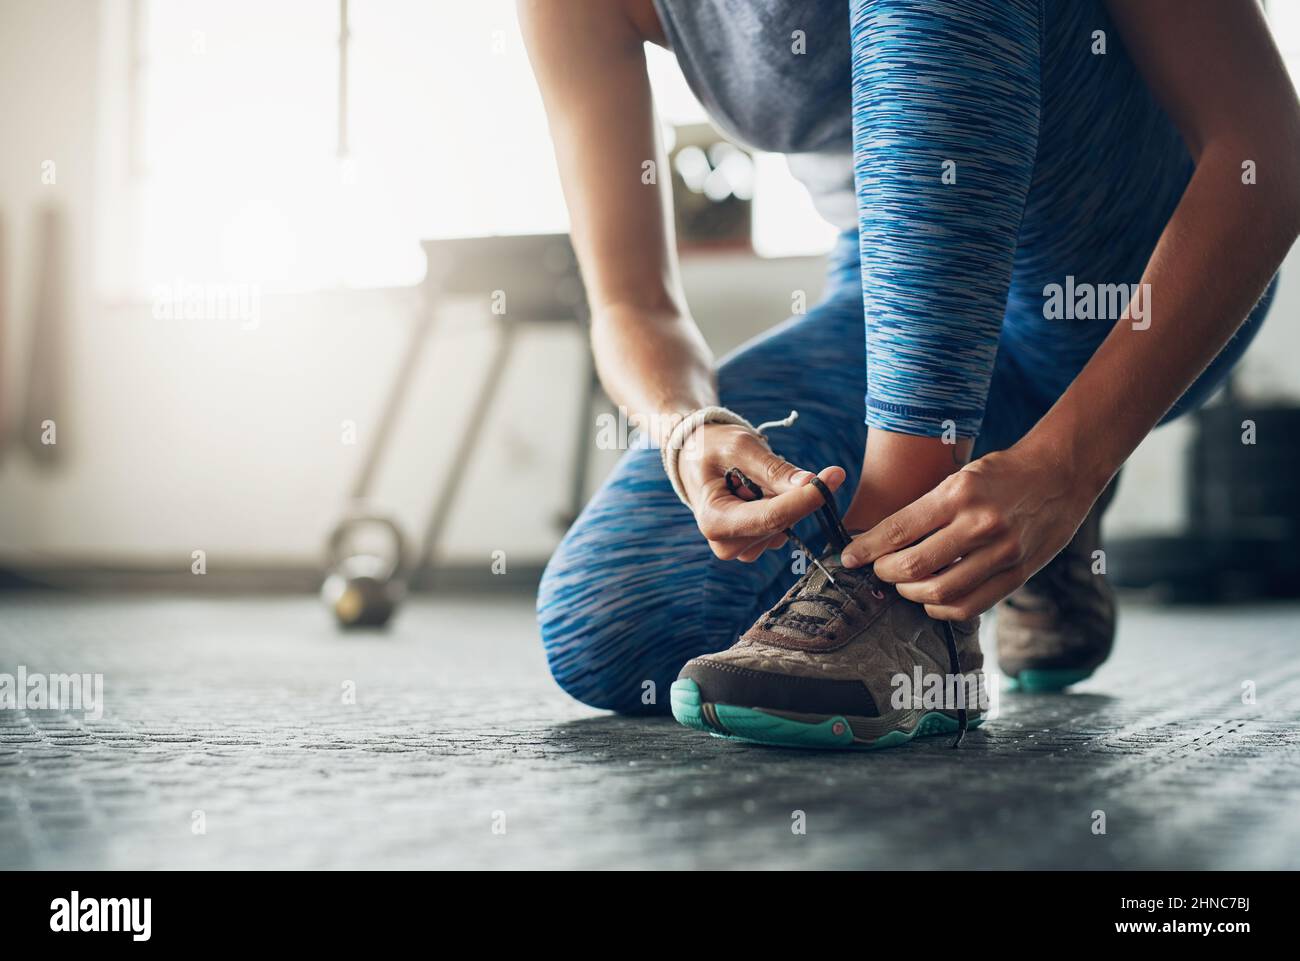 The right shoes makes all the difference. Shot of a woman tying her shoelaces in a gym. Stock Photo